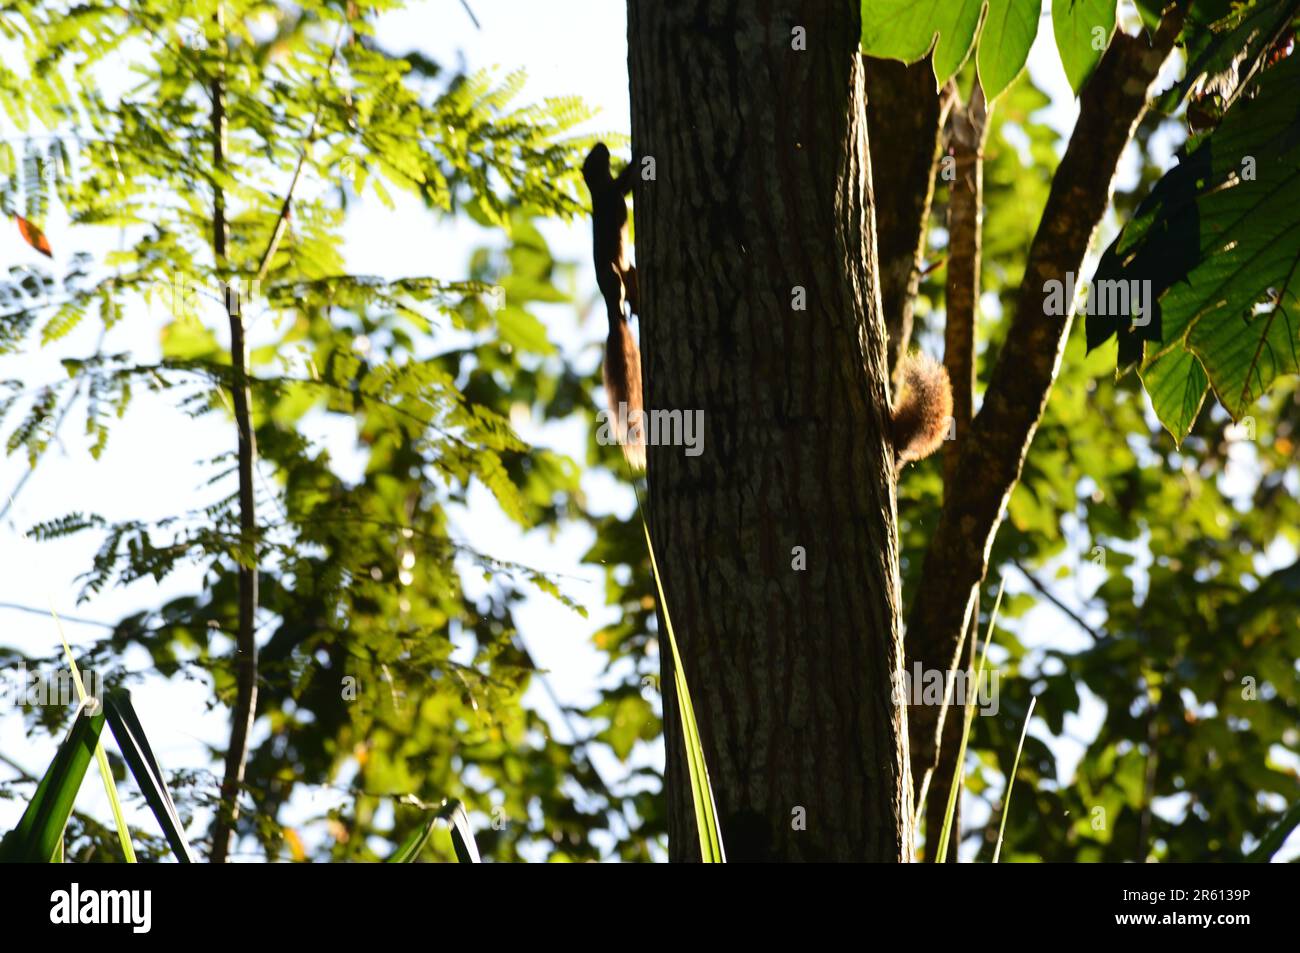 A red tailed squirrel climbing a tree in the protected area in Puerto Jemenez, Osa Peninsula, Costa Rica. Stock Photo